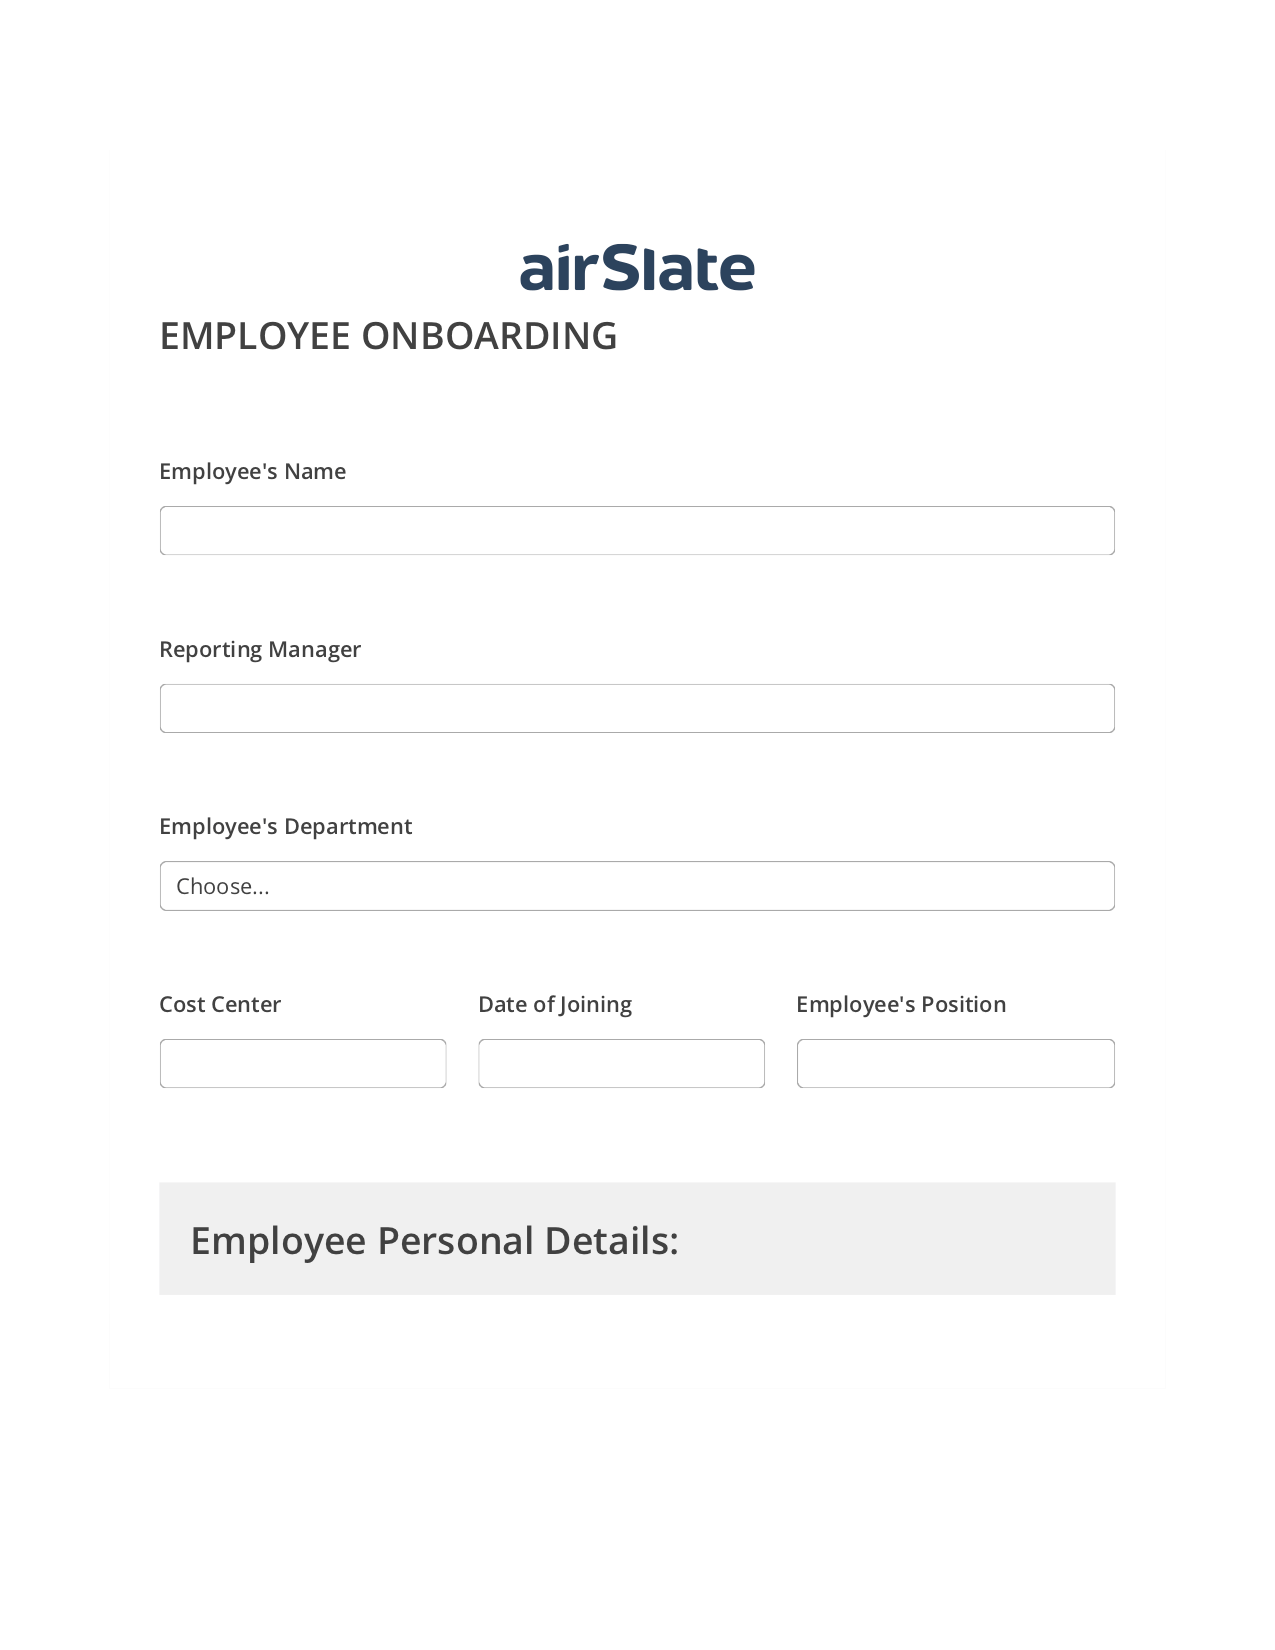 Employee Onboarding Workflow Pre-fill from CSV File Dropdown Options Bot, Roles Reminder Bot, Archive to OneDrive Bot